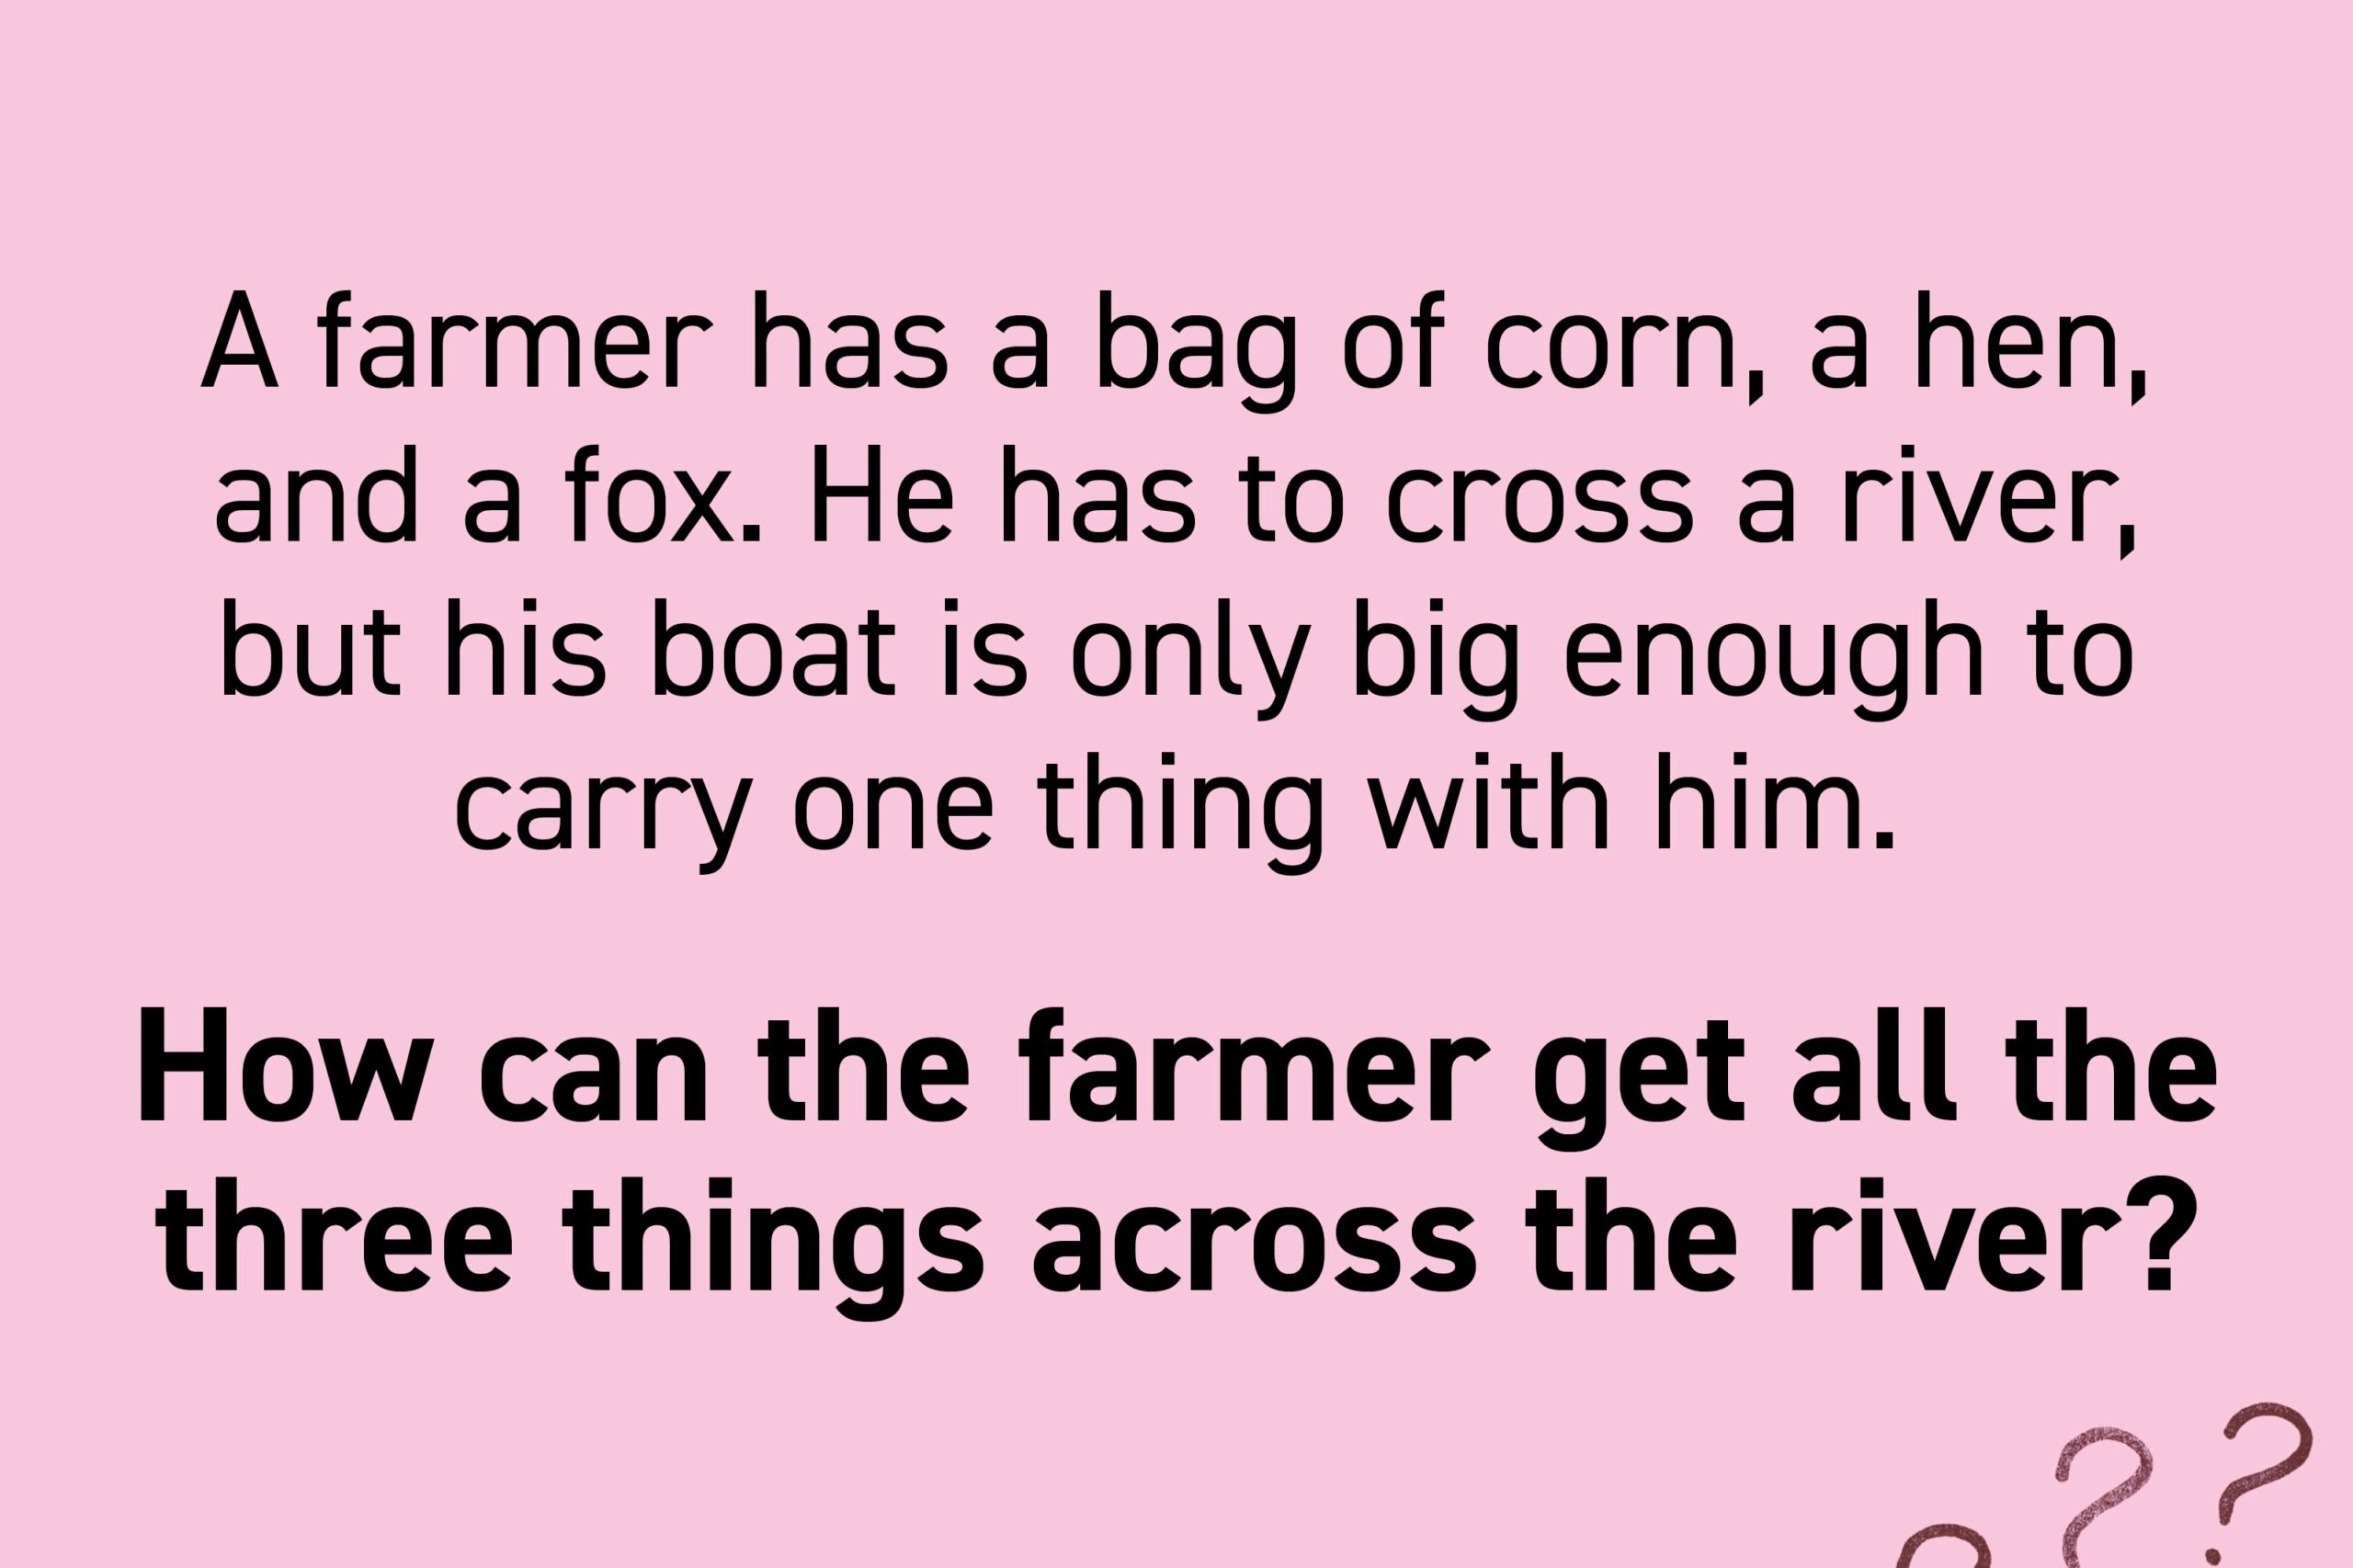 A farmer has a bag of corn, a hen, and a fox. He has to cross a river, but his boat is only big enough to carry one thing with him. If the hen is left with the corn, she will eat it. If the hen is left with the fox, the fox will eat the hen. How can the farmer get all the three things across the river?